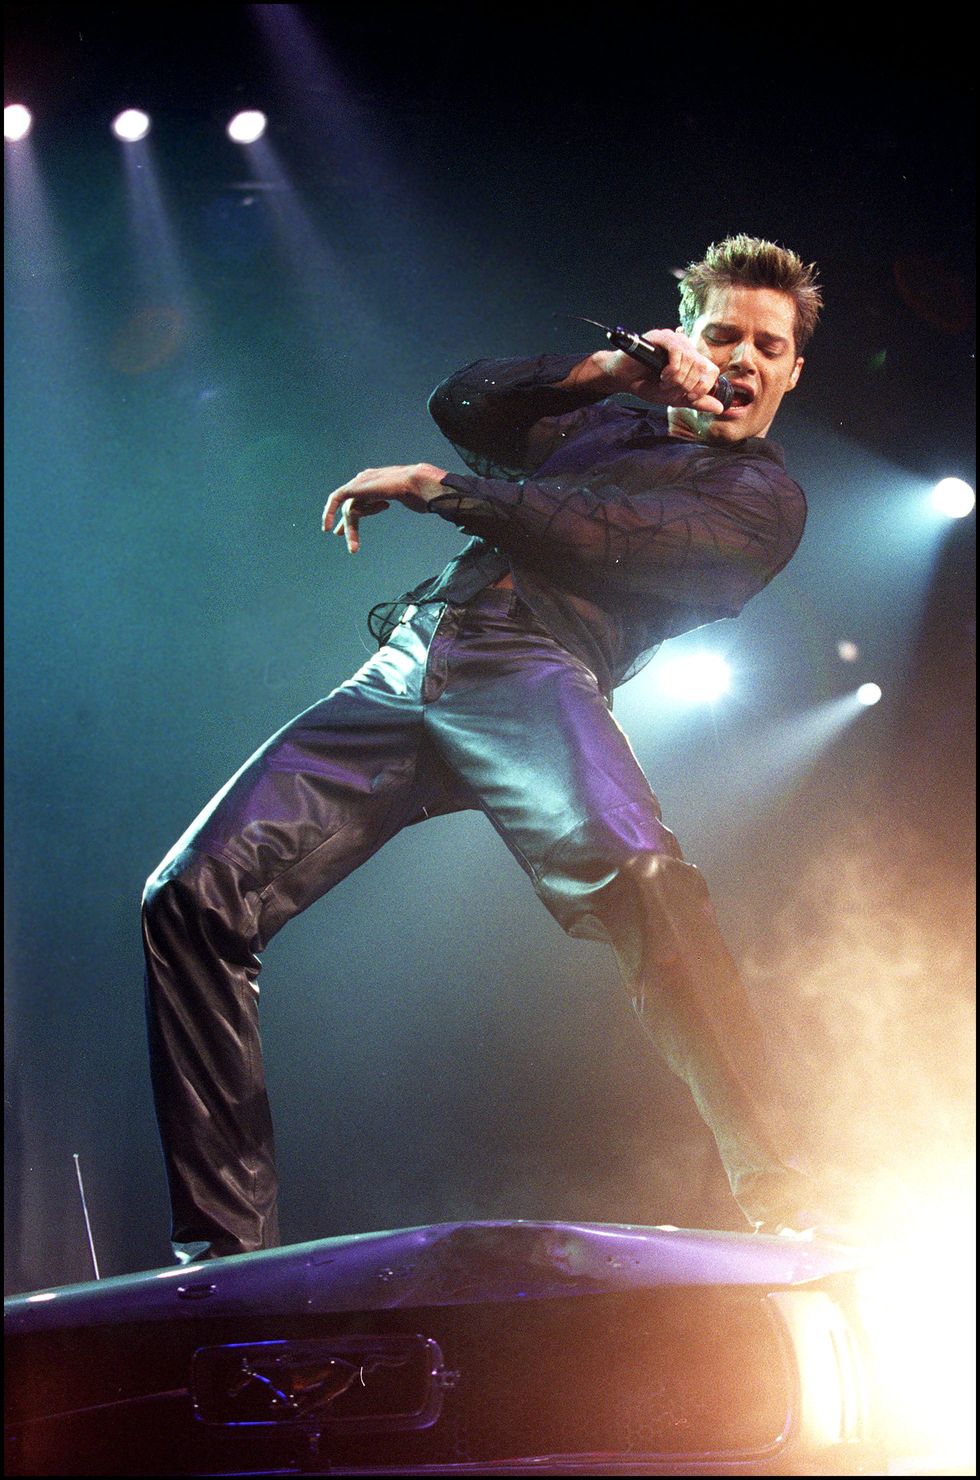 Latino Bomb Ricky Martin On Stage At Paris Bercy Arena In Paris, France On May 03, 2000.